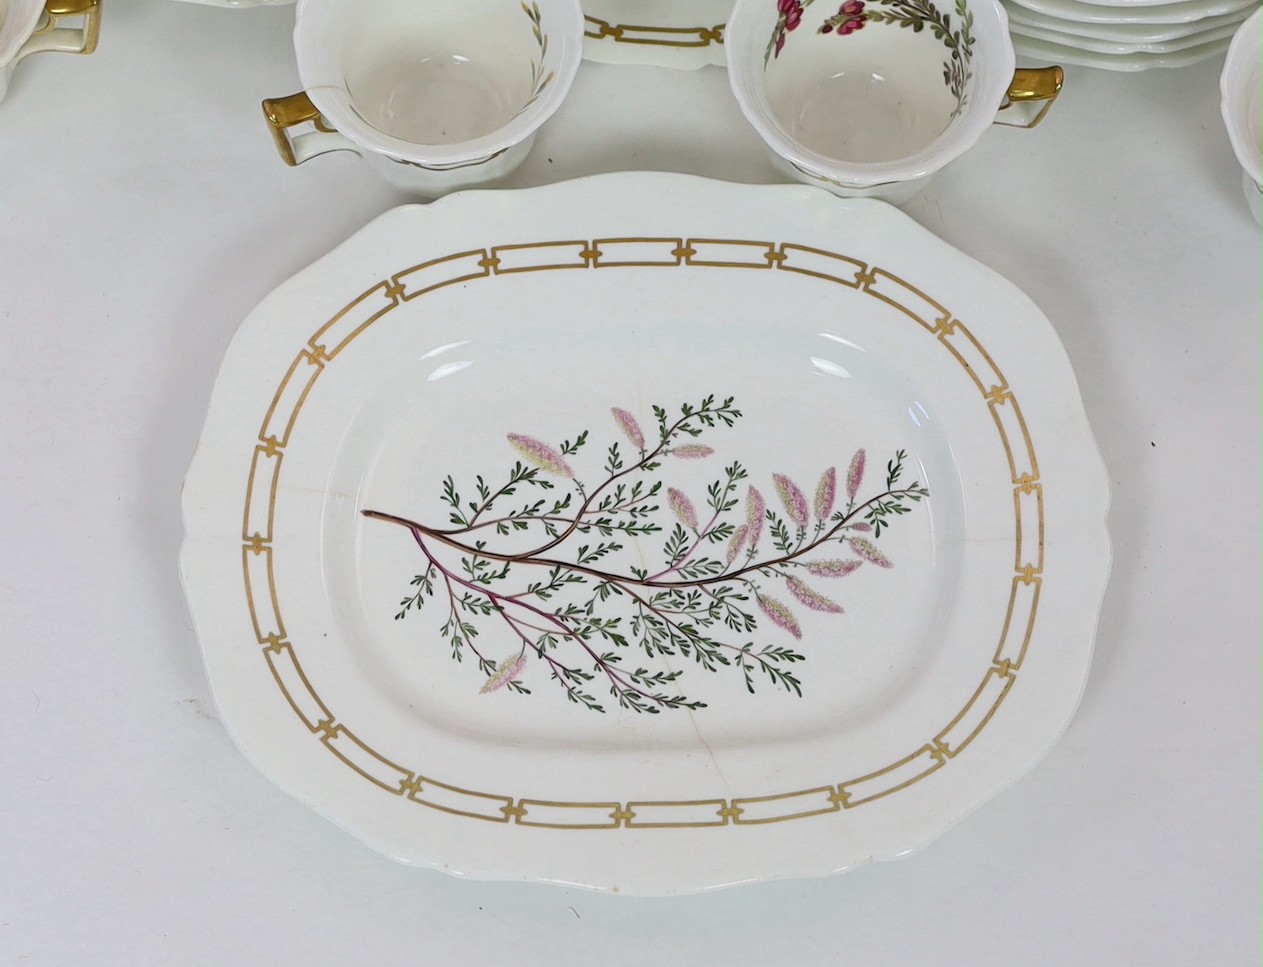 A rare Rockingham botanical specimen part breakfast service, griffin statant mark, c.1826, with some matching pieces, c.1830-5